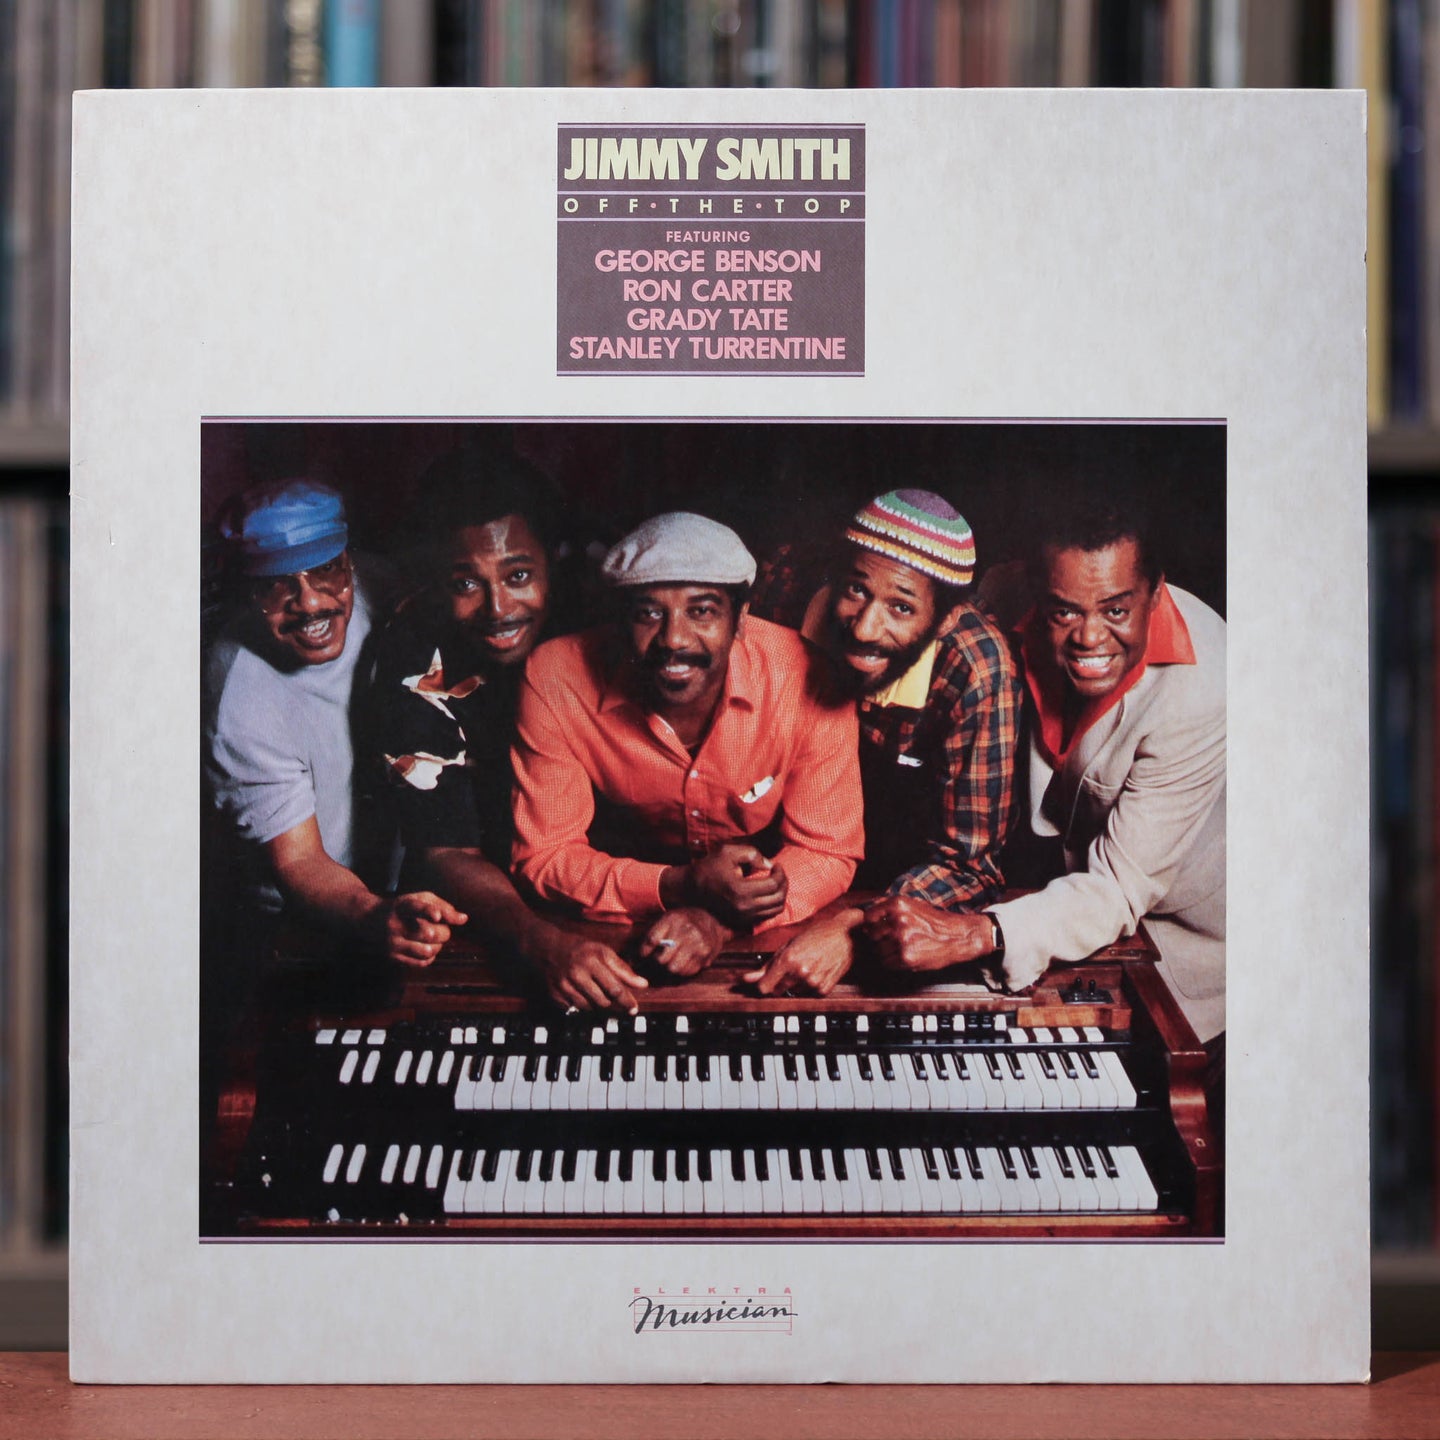 Jimmy Smith Featuring George Benson, Ron Carter, Grady Tate, Stanley Turrentine - Off The Top - 1982 Elektra Musician, EX/VG+